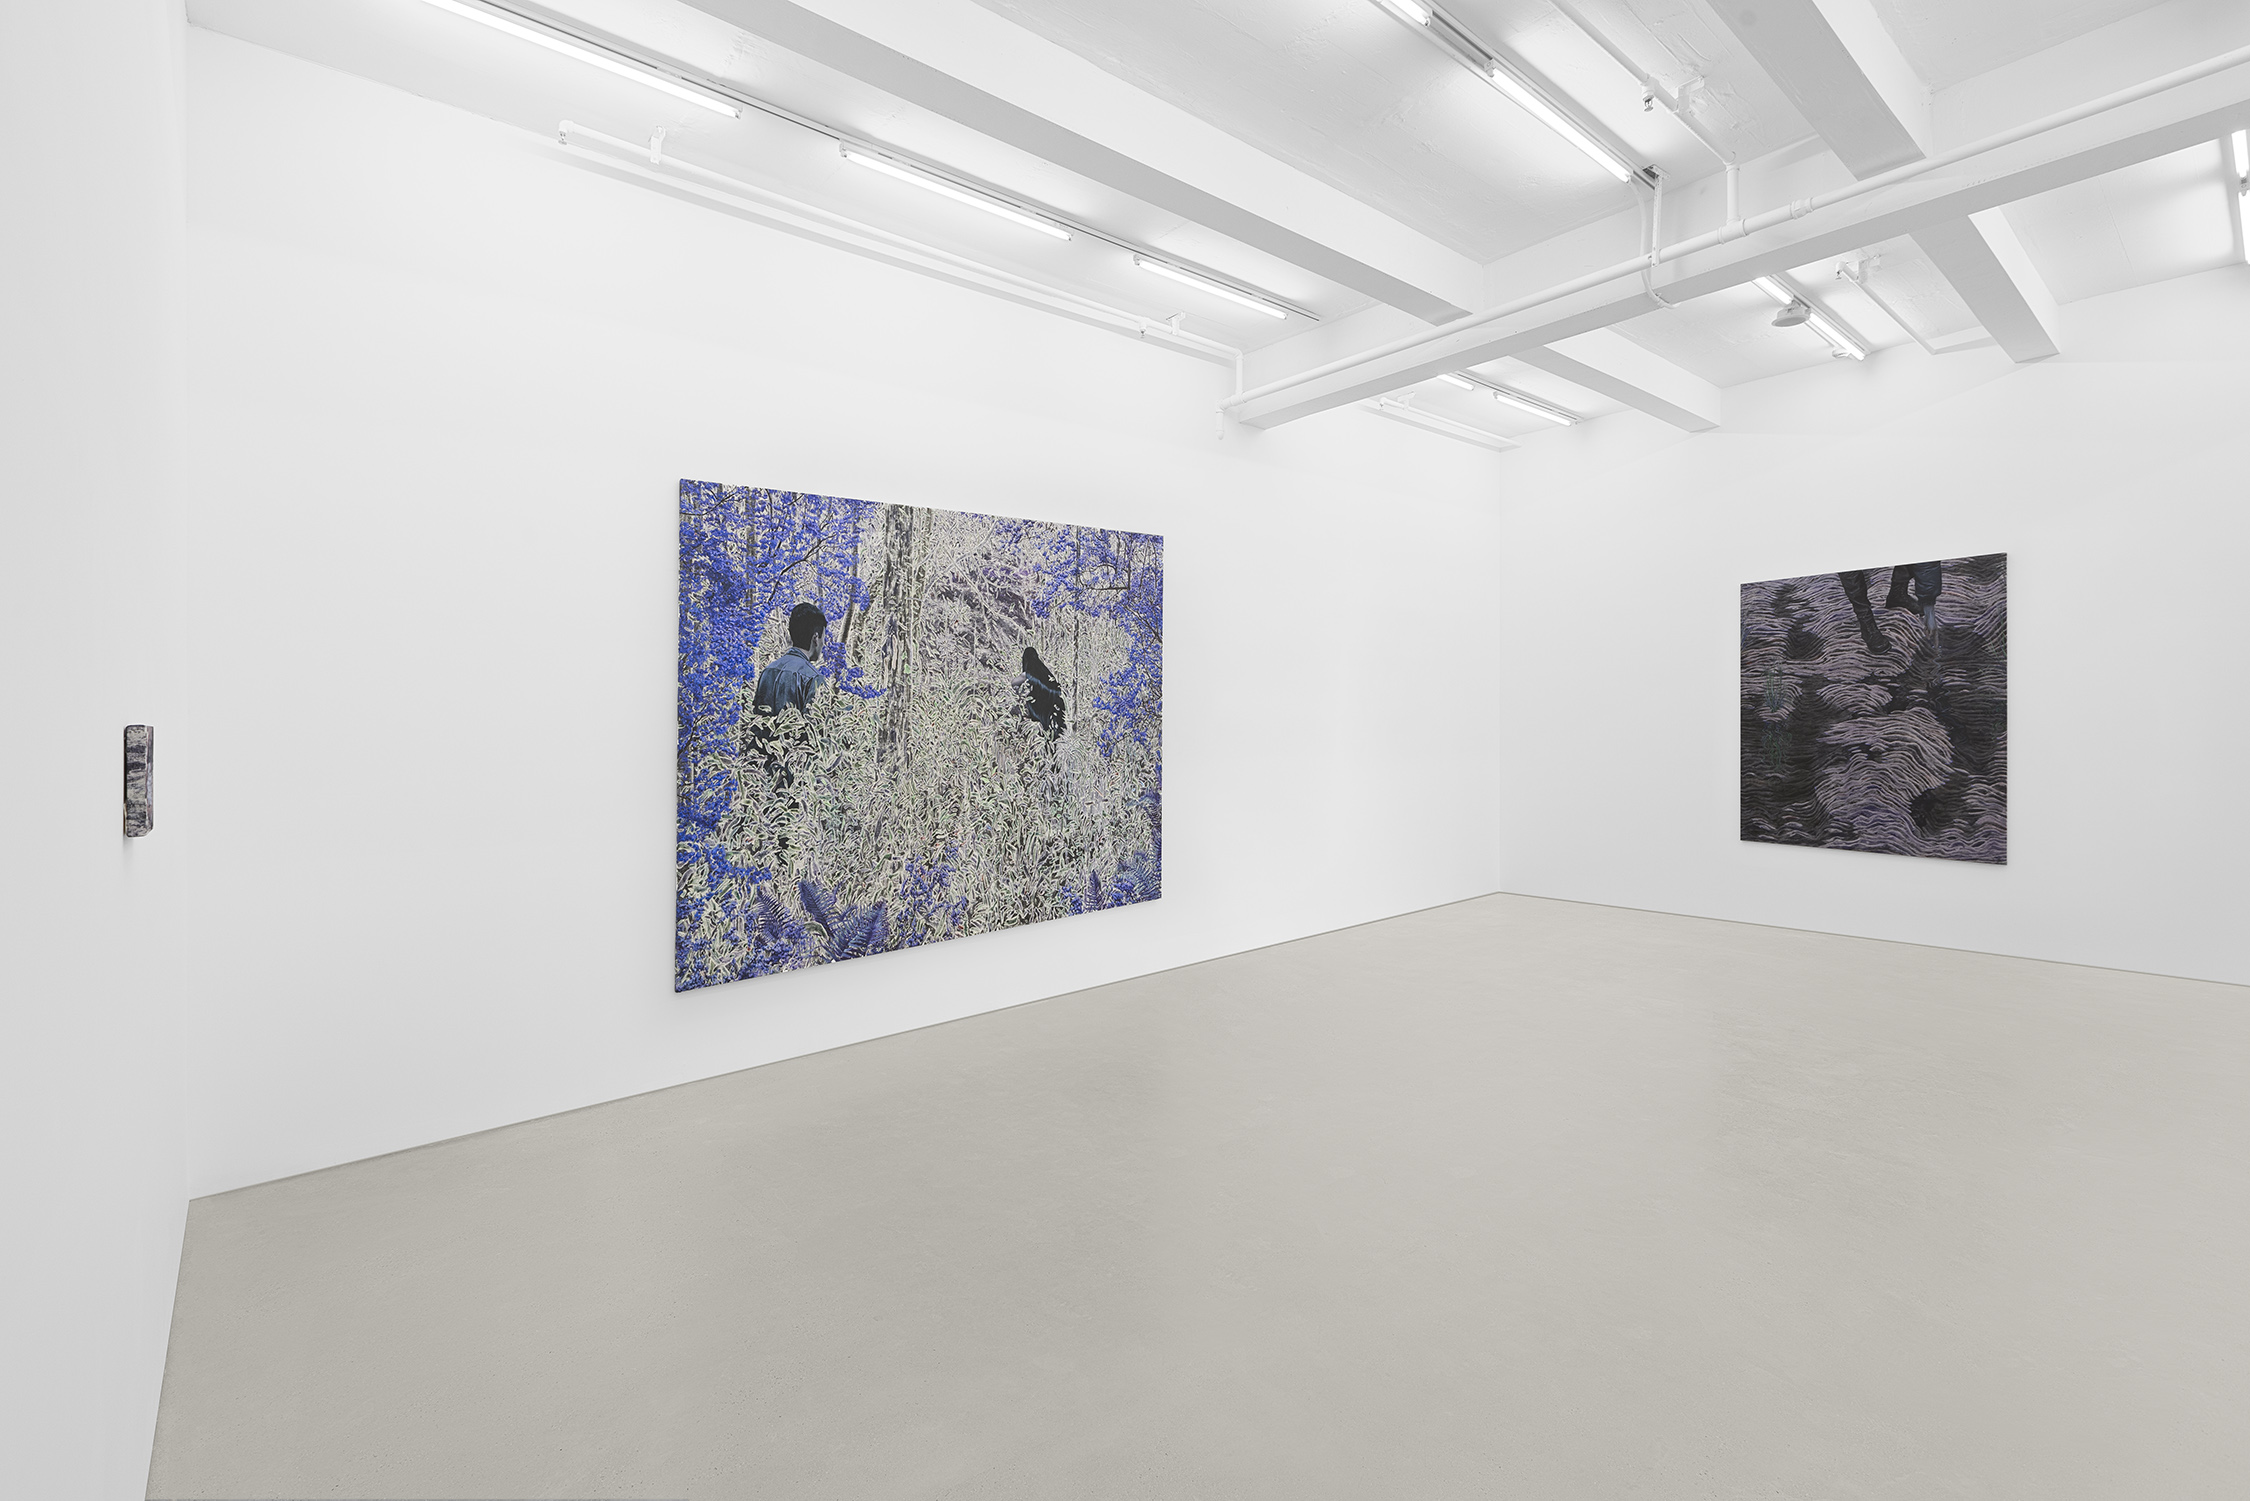 Installation view of Michael Ho's solo exhibition Grotto Heavens at Gallery Vacancy, 2023